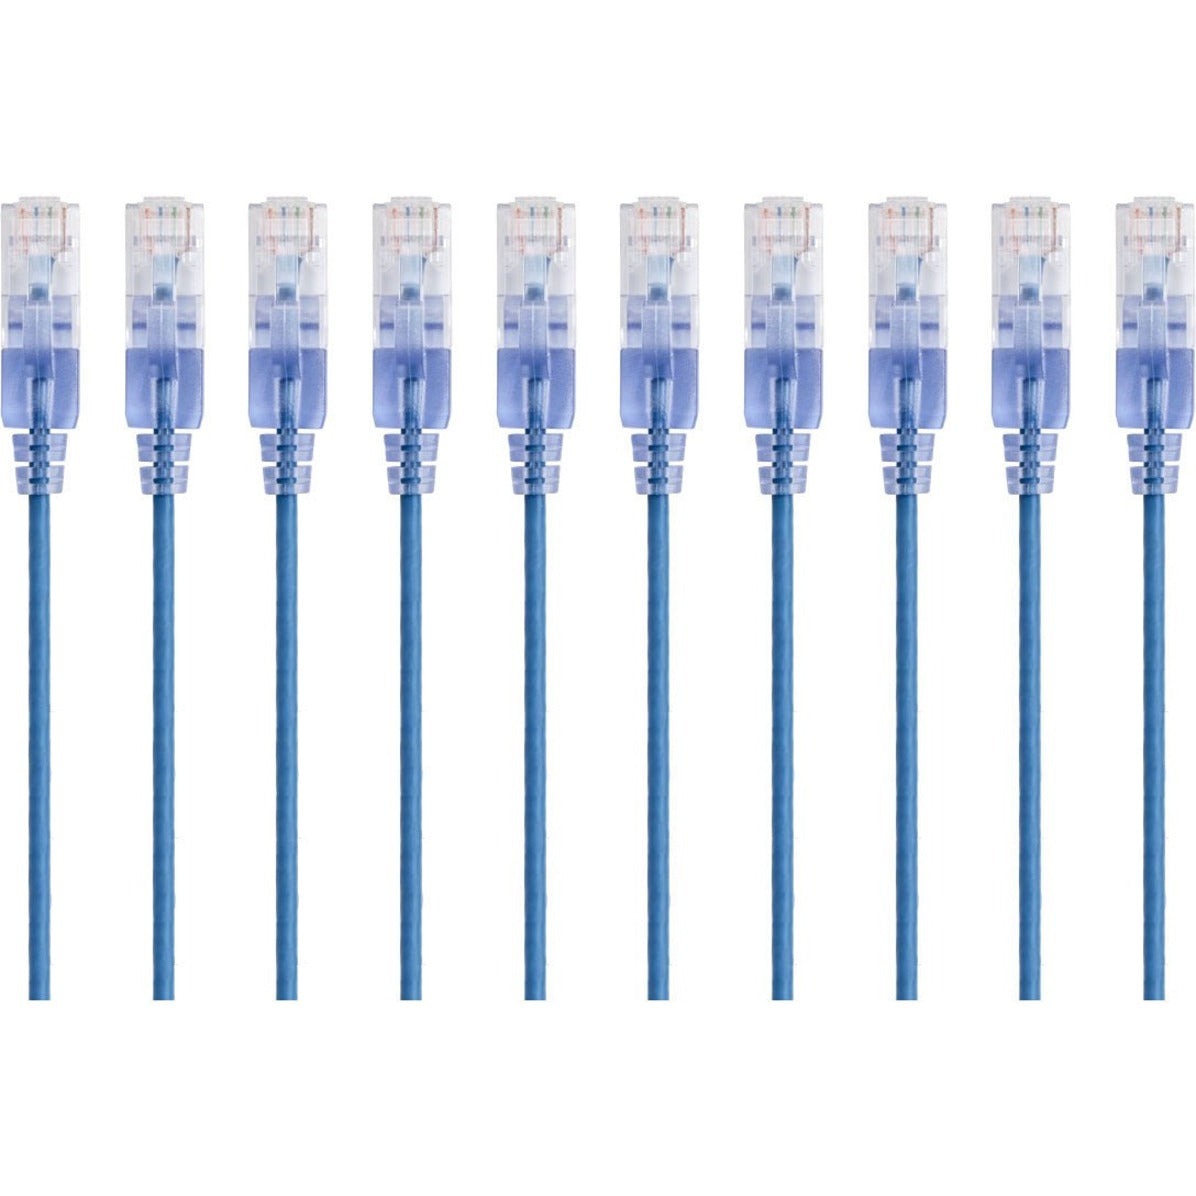 Monoprice 15154 SlimRun Cat6A Ethernet Network Patch Cable 3ft Blue, 10-Pack